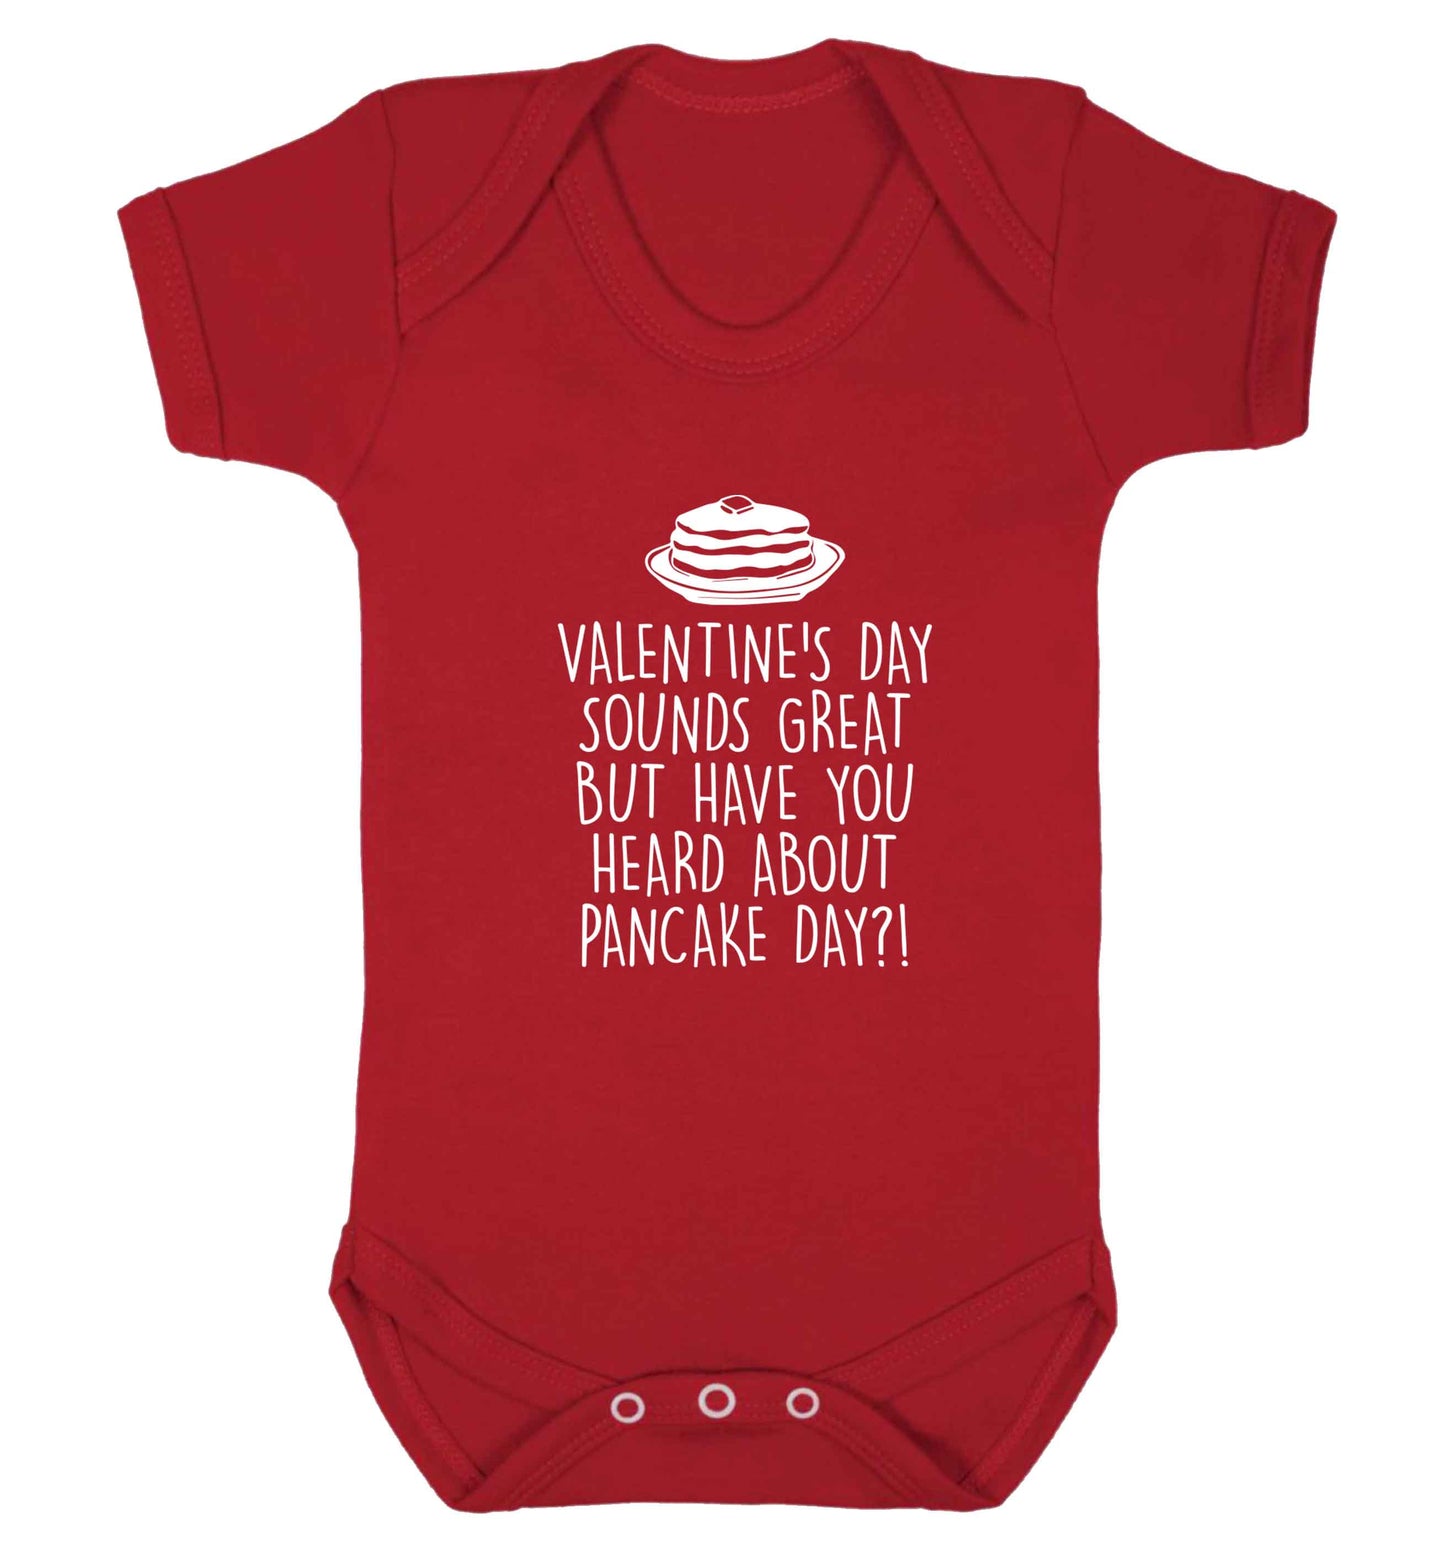 Valentine's day sounds great but have you heard about pancake day?! baby vest red 18-24 months